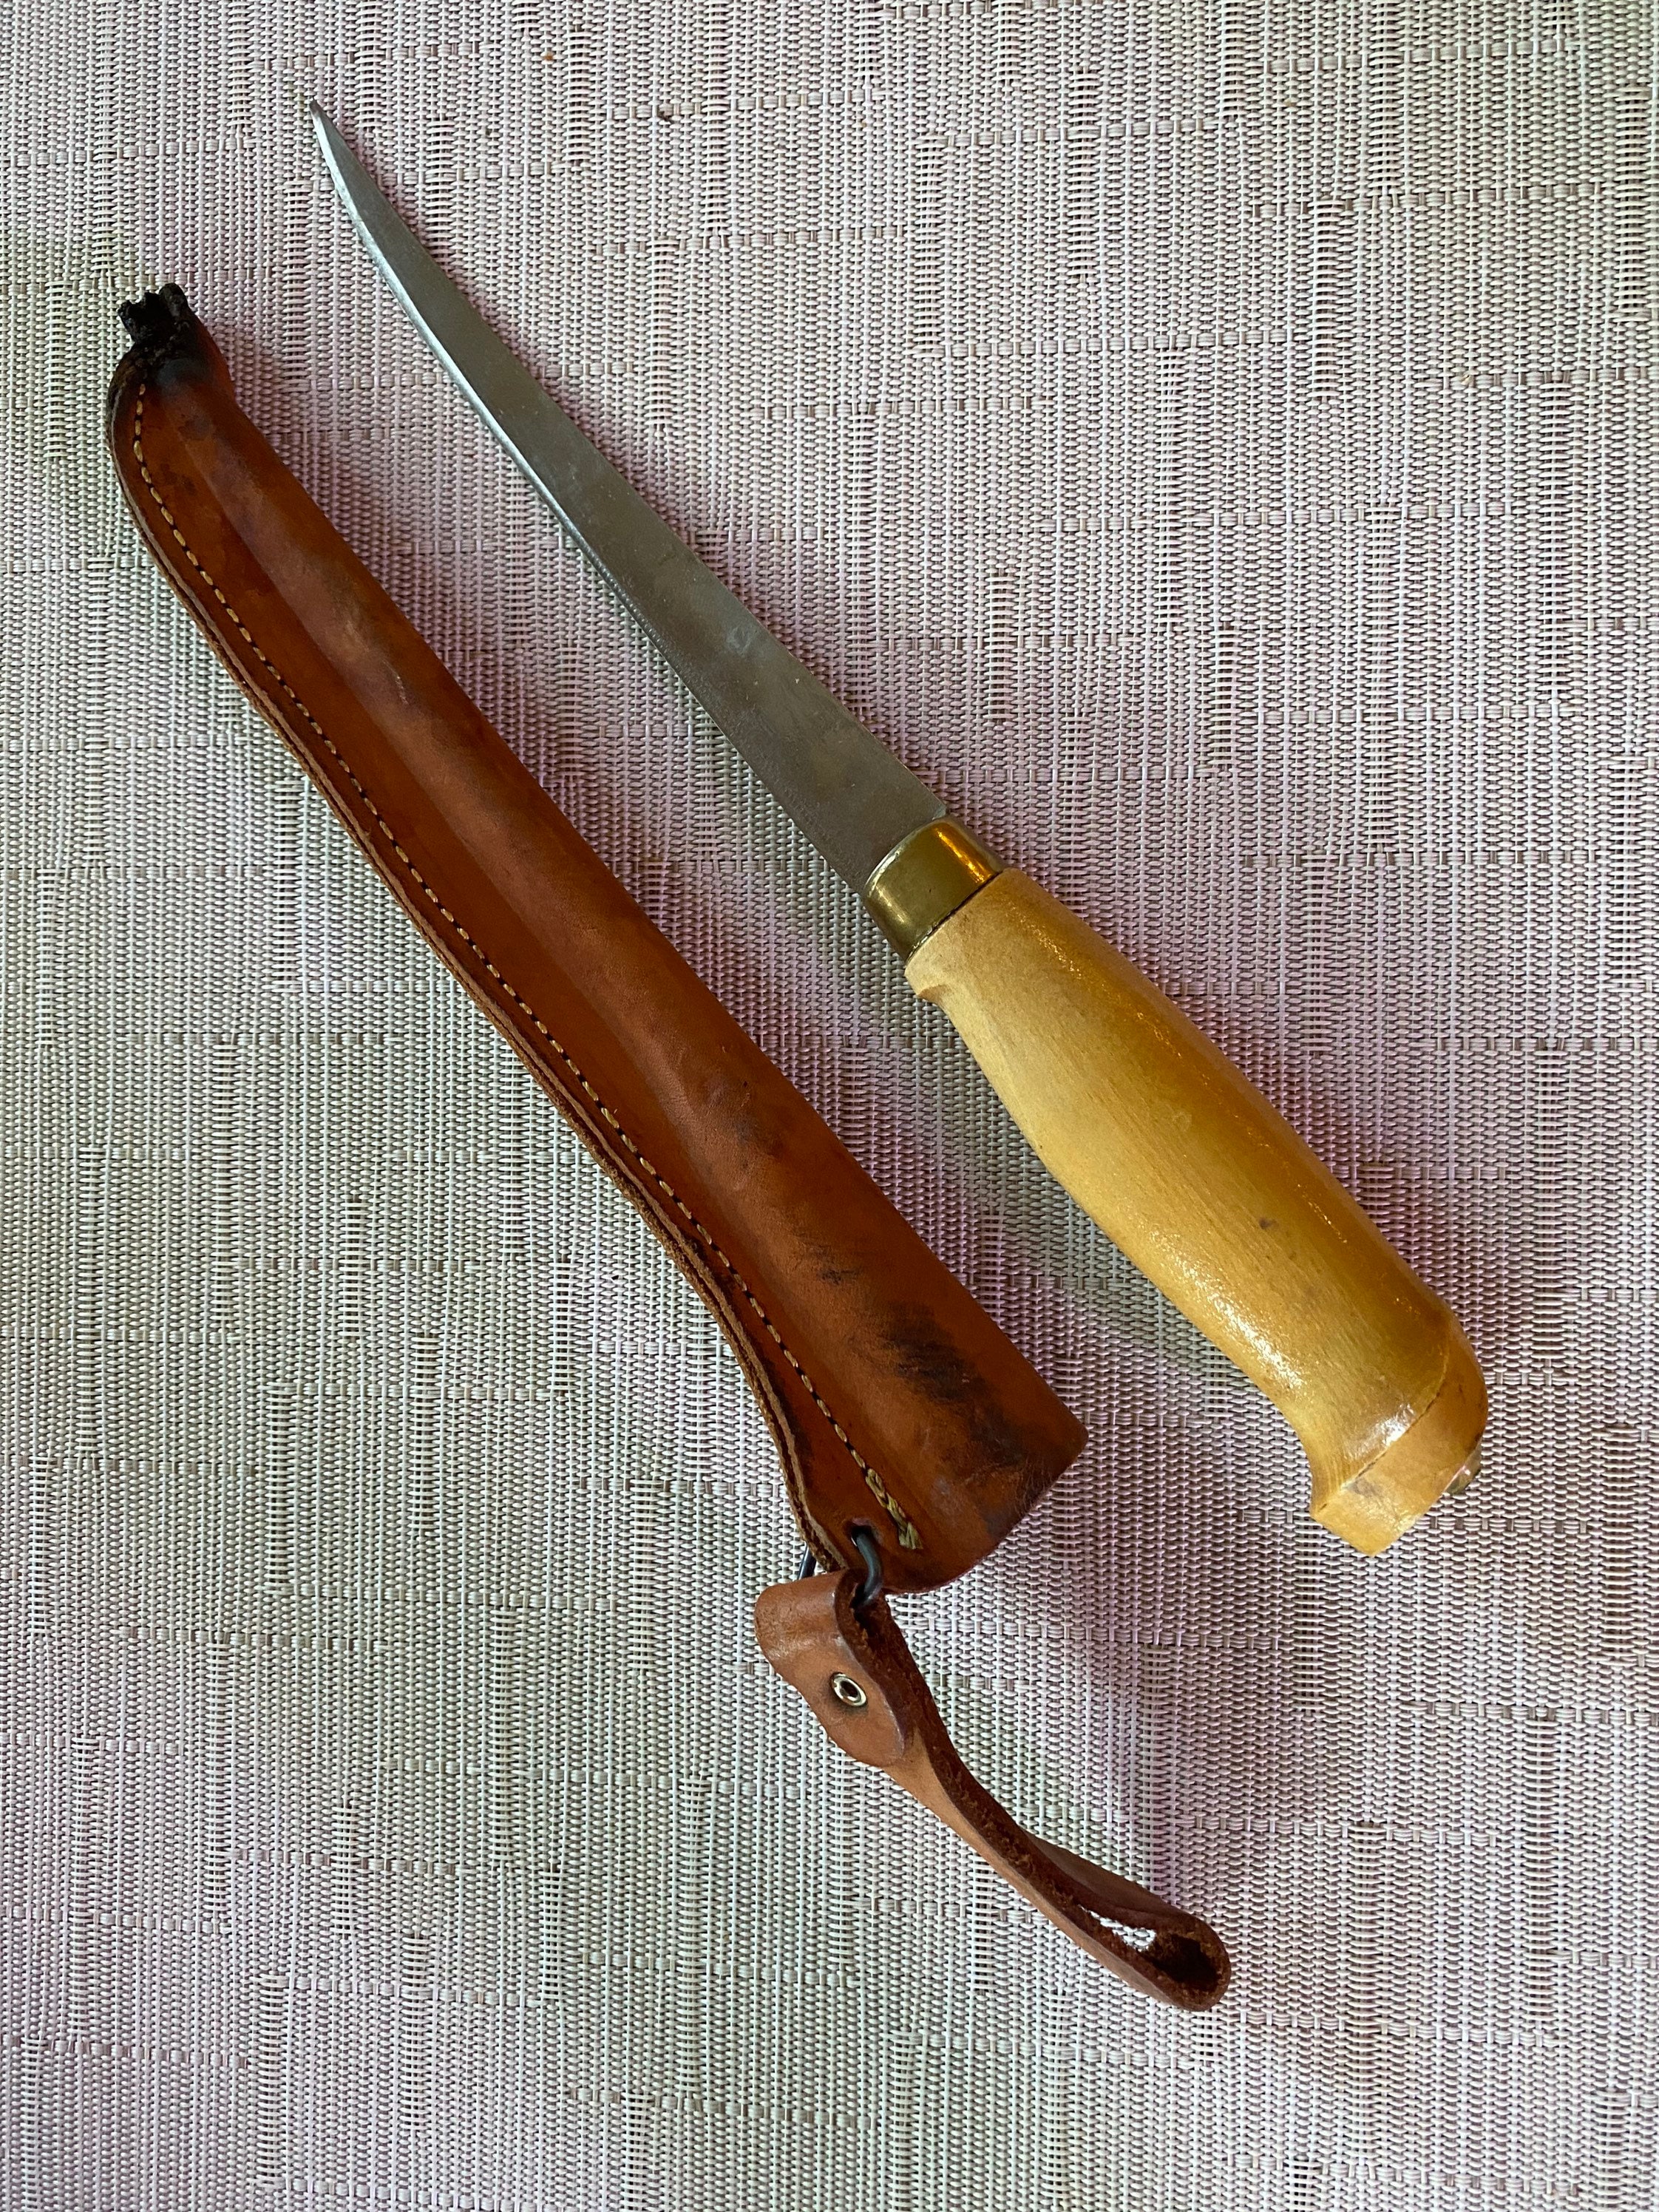 Vintage Rapala Fish and Fillet Boning Hunting Knife With Tooled Leather  Sheath Antique Swedish Steel Blade Handmade in Finland by J.marttini -   Norway